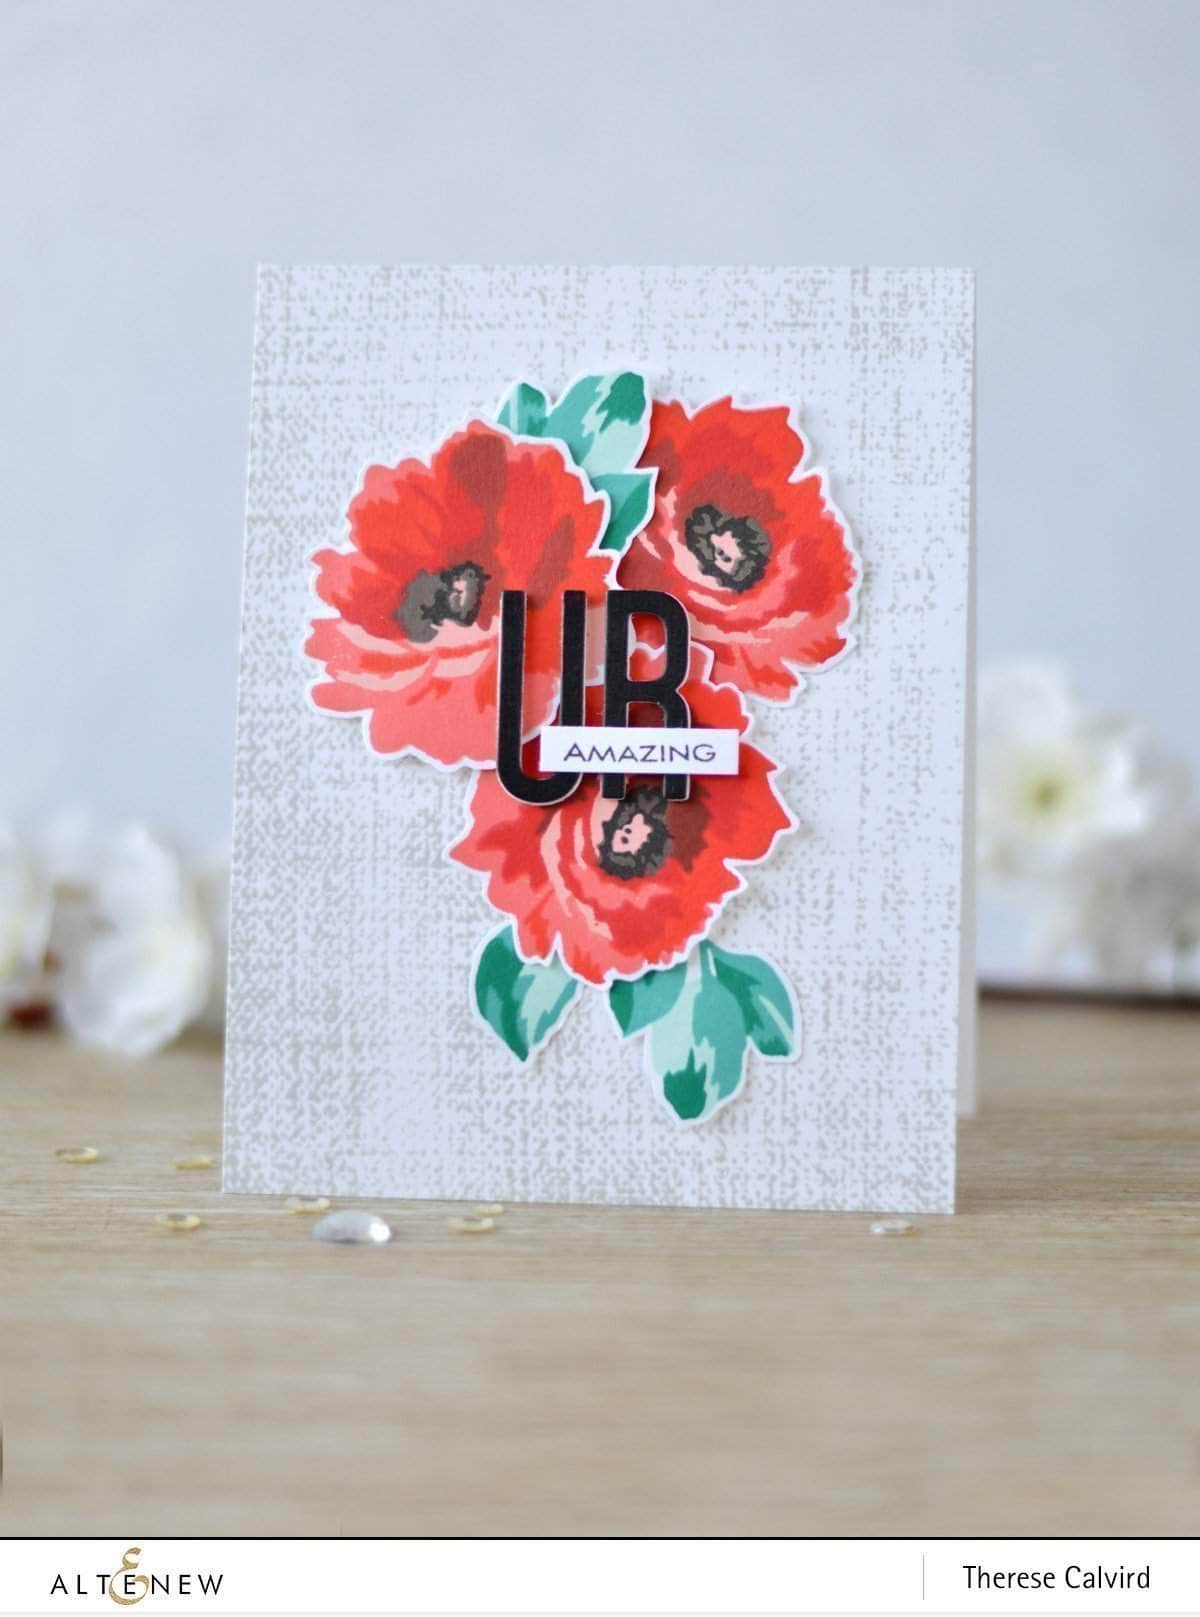 Photocentric Clear Stamps Rustic Linen Stamp Set